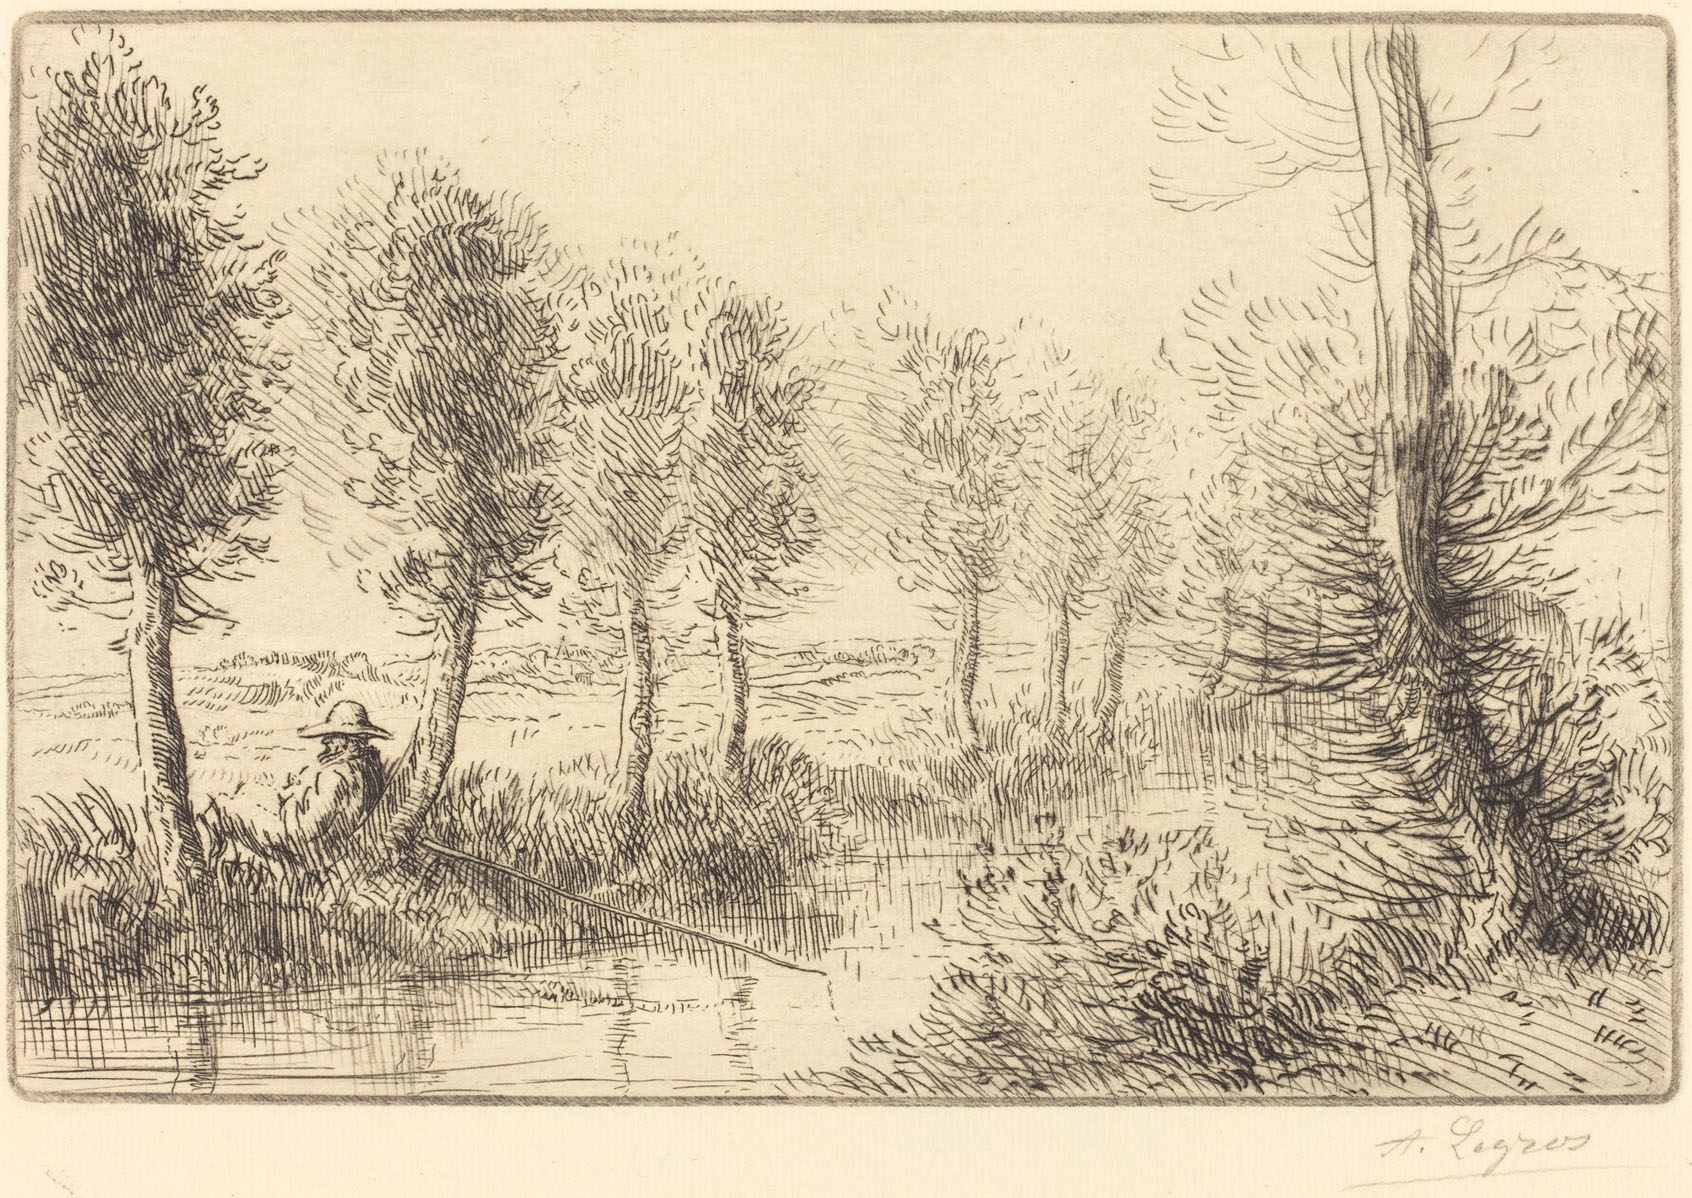 Alphonse Legros, Near the Mill (Pres du moulin), French, 1837 - 1911, , etching and drypoint, Rosenwald Collection